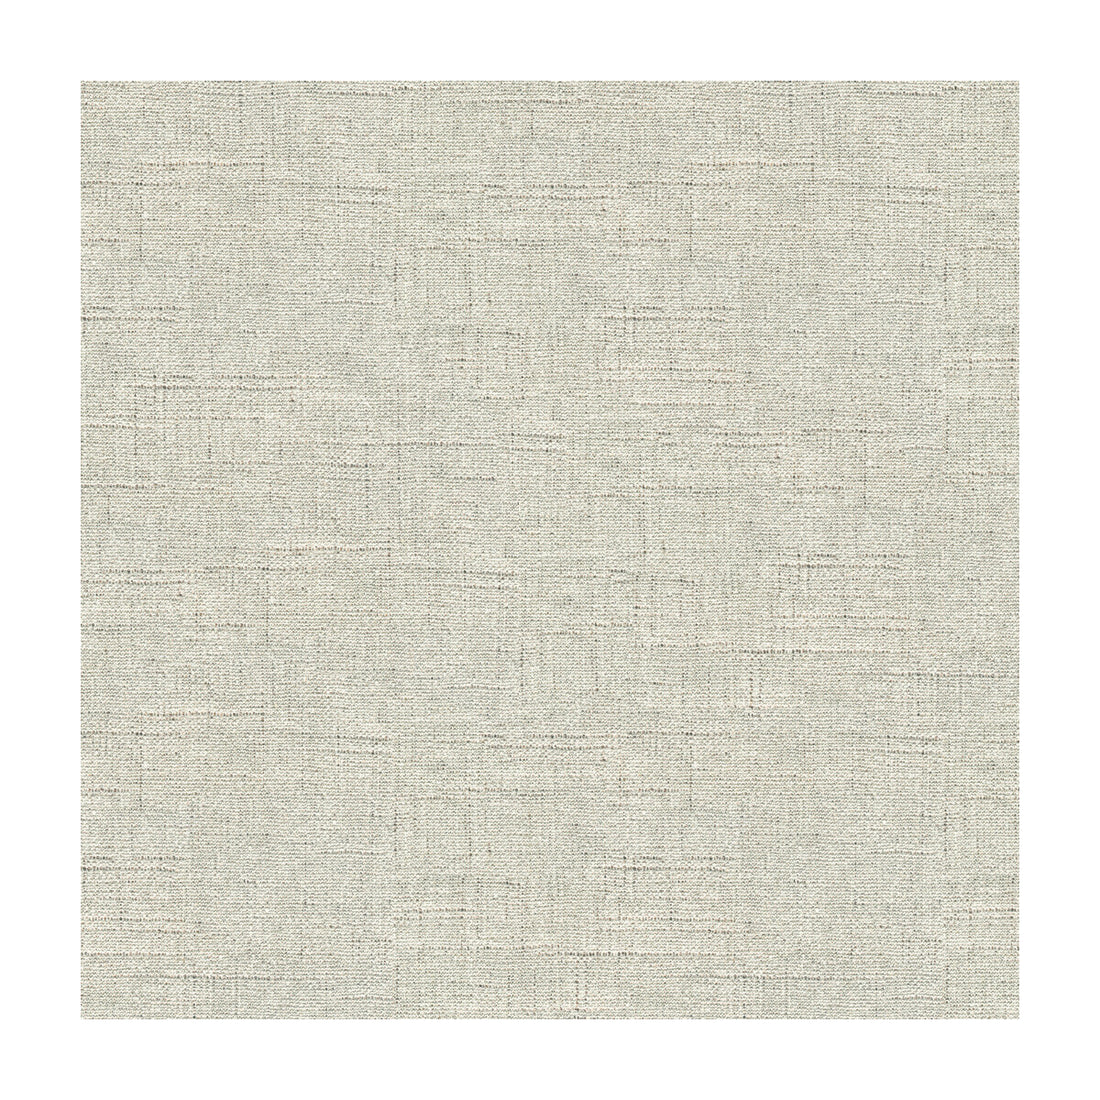 Kravet Basics fabric in 33838-1611 color - pattern 33838.1611.0 - by Kravet Basics in the Perfect Plains collection